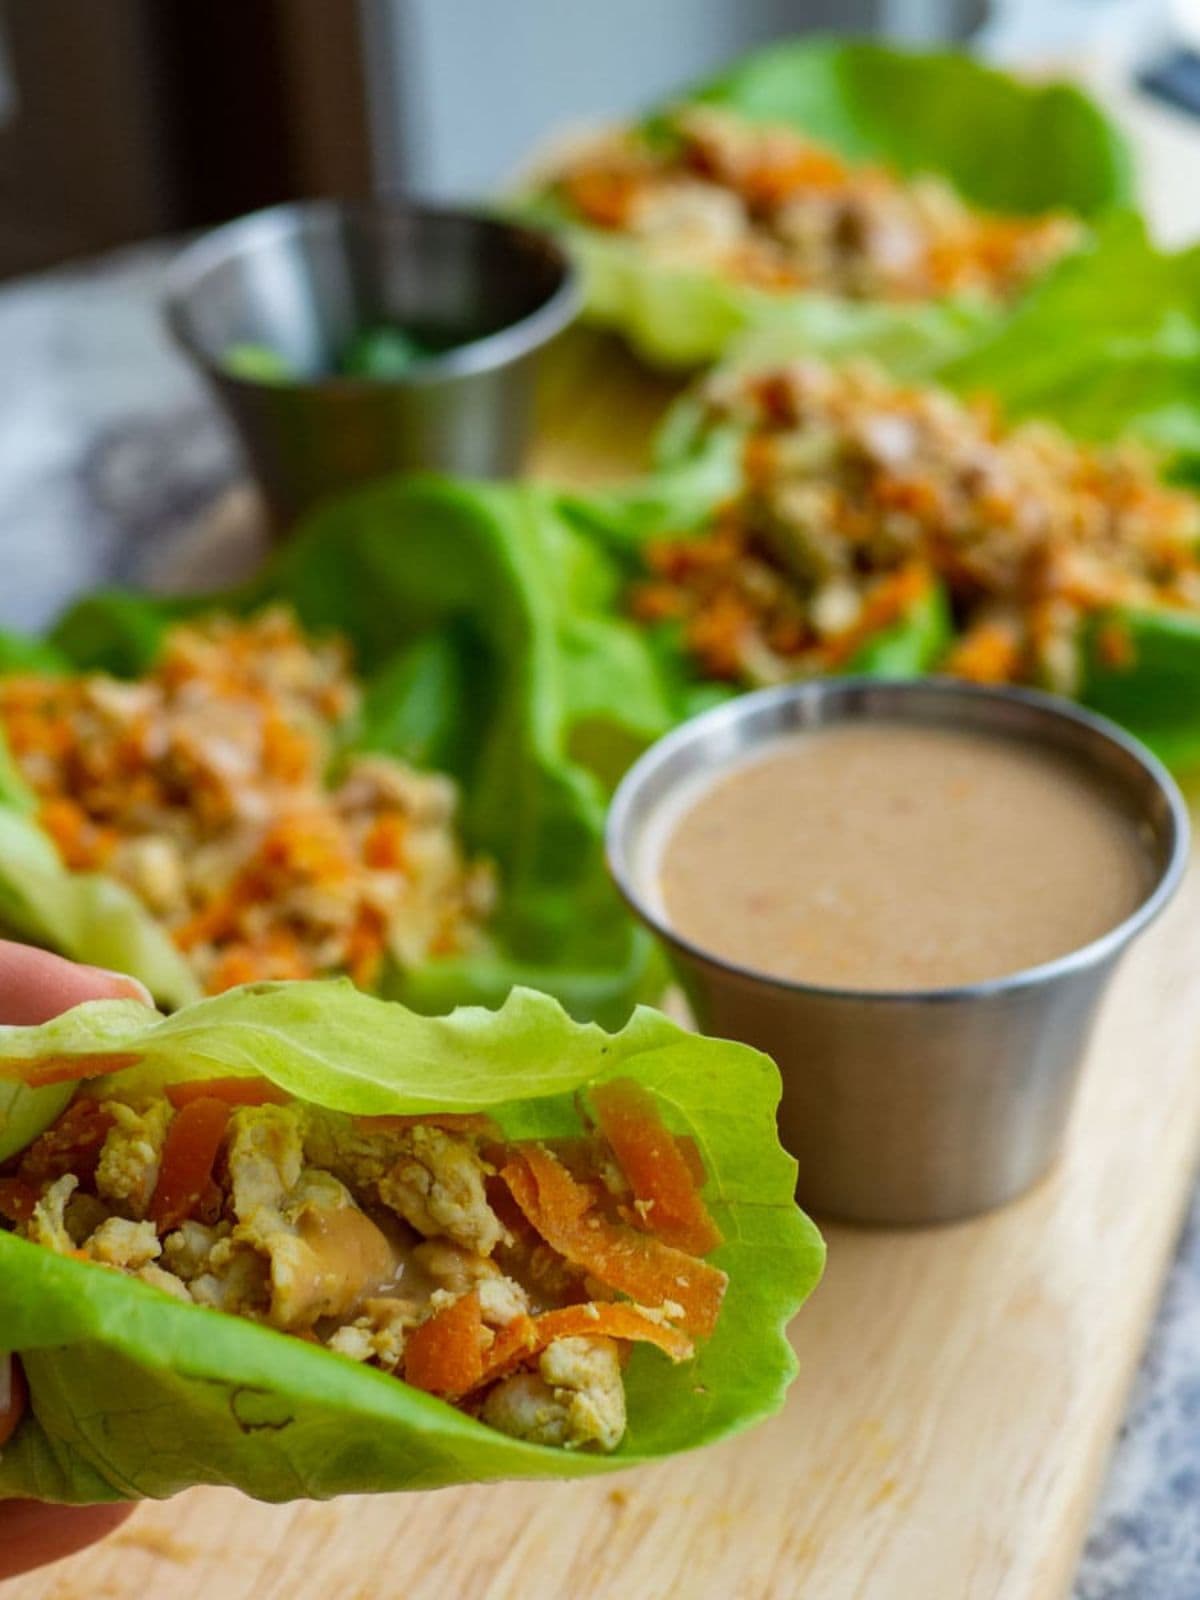 Hand holding up a turkey lettuce wrap topped with peanut sauce.